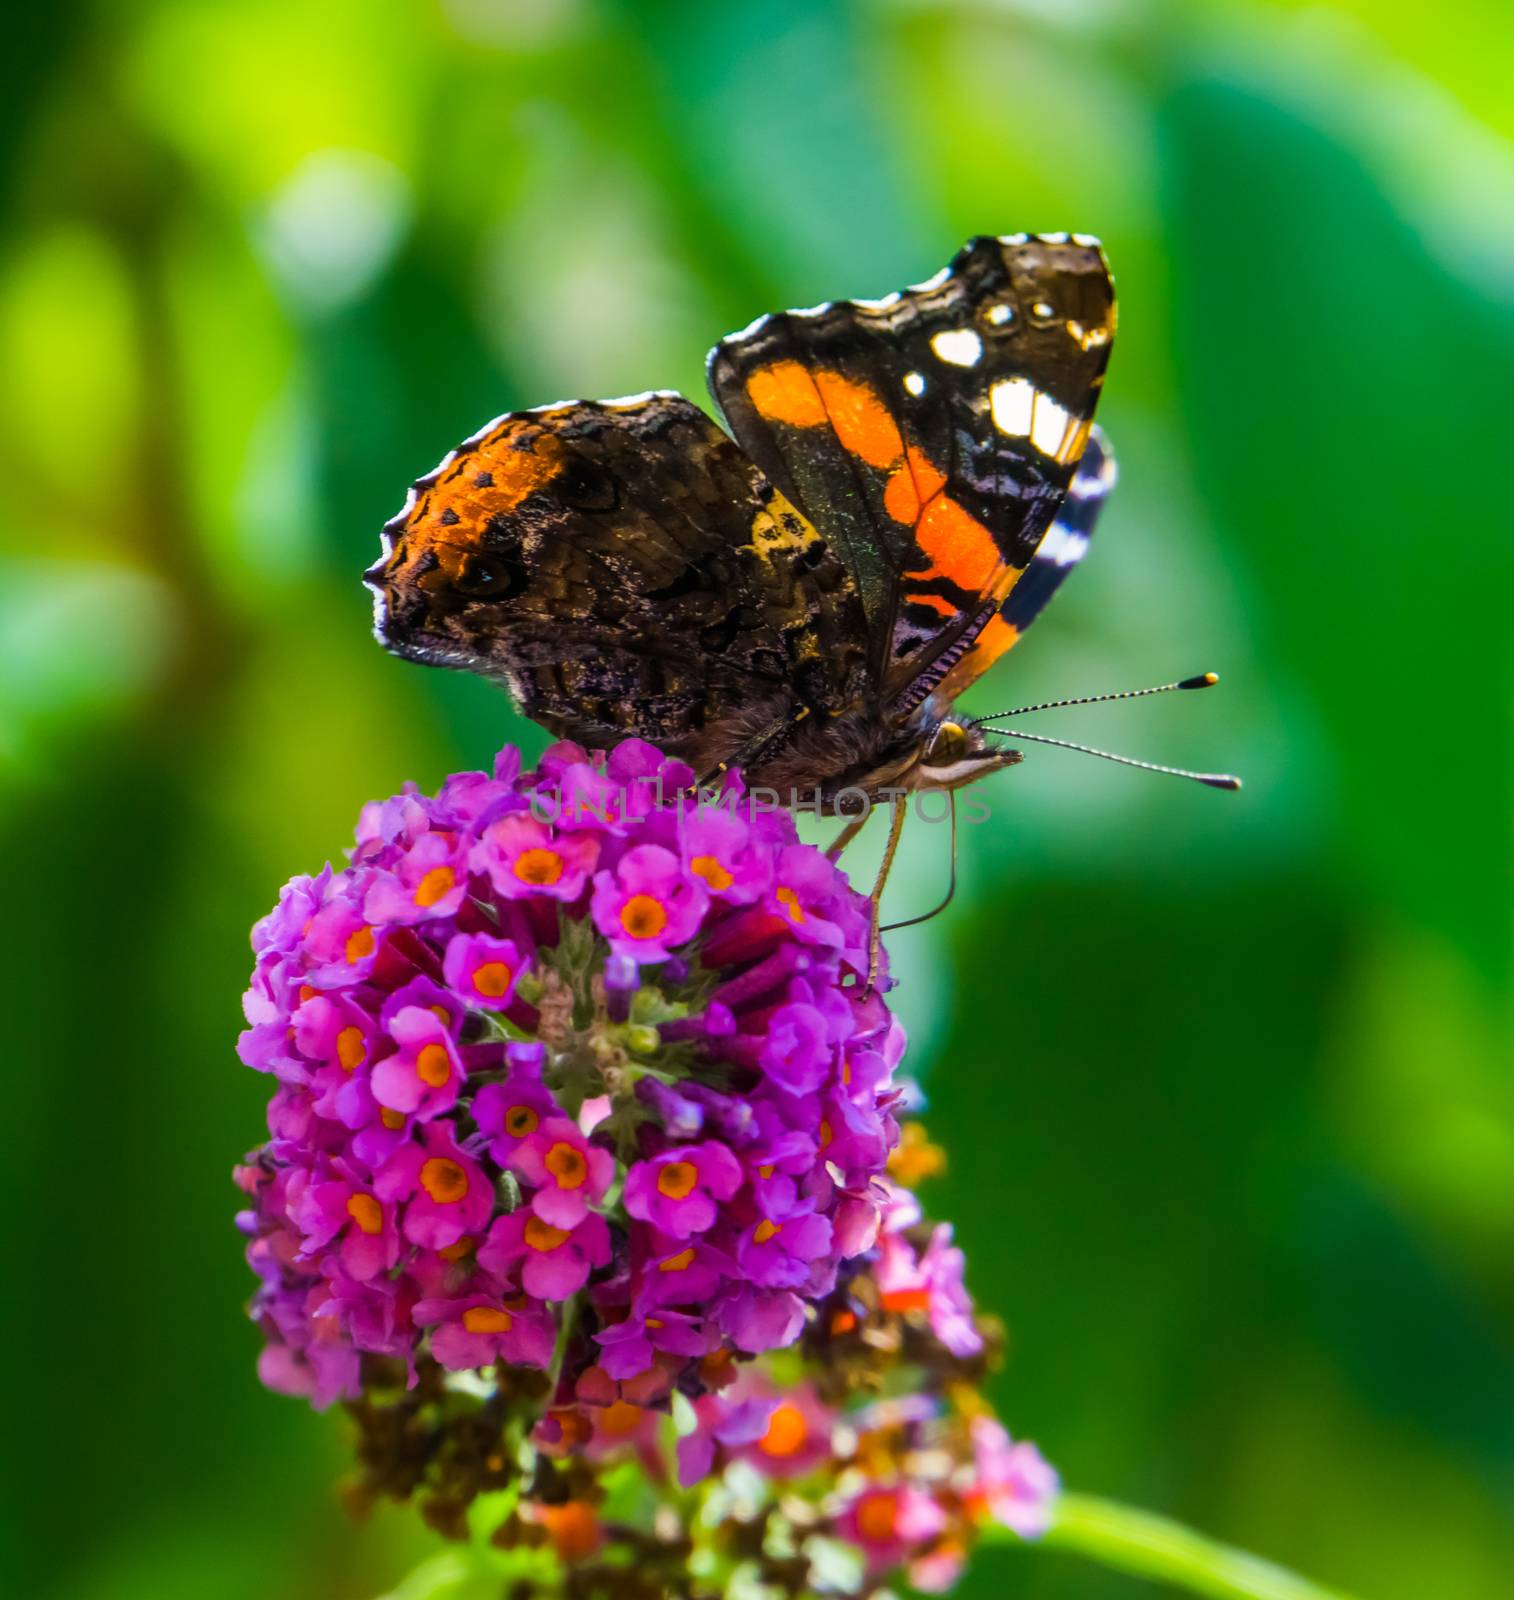 beautiful macro closeup of a red admiral butterfly, common insect specie from Europe by charlottebleijenberg